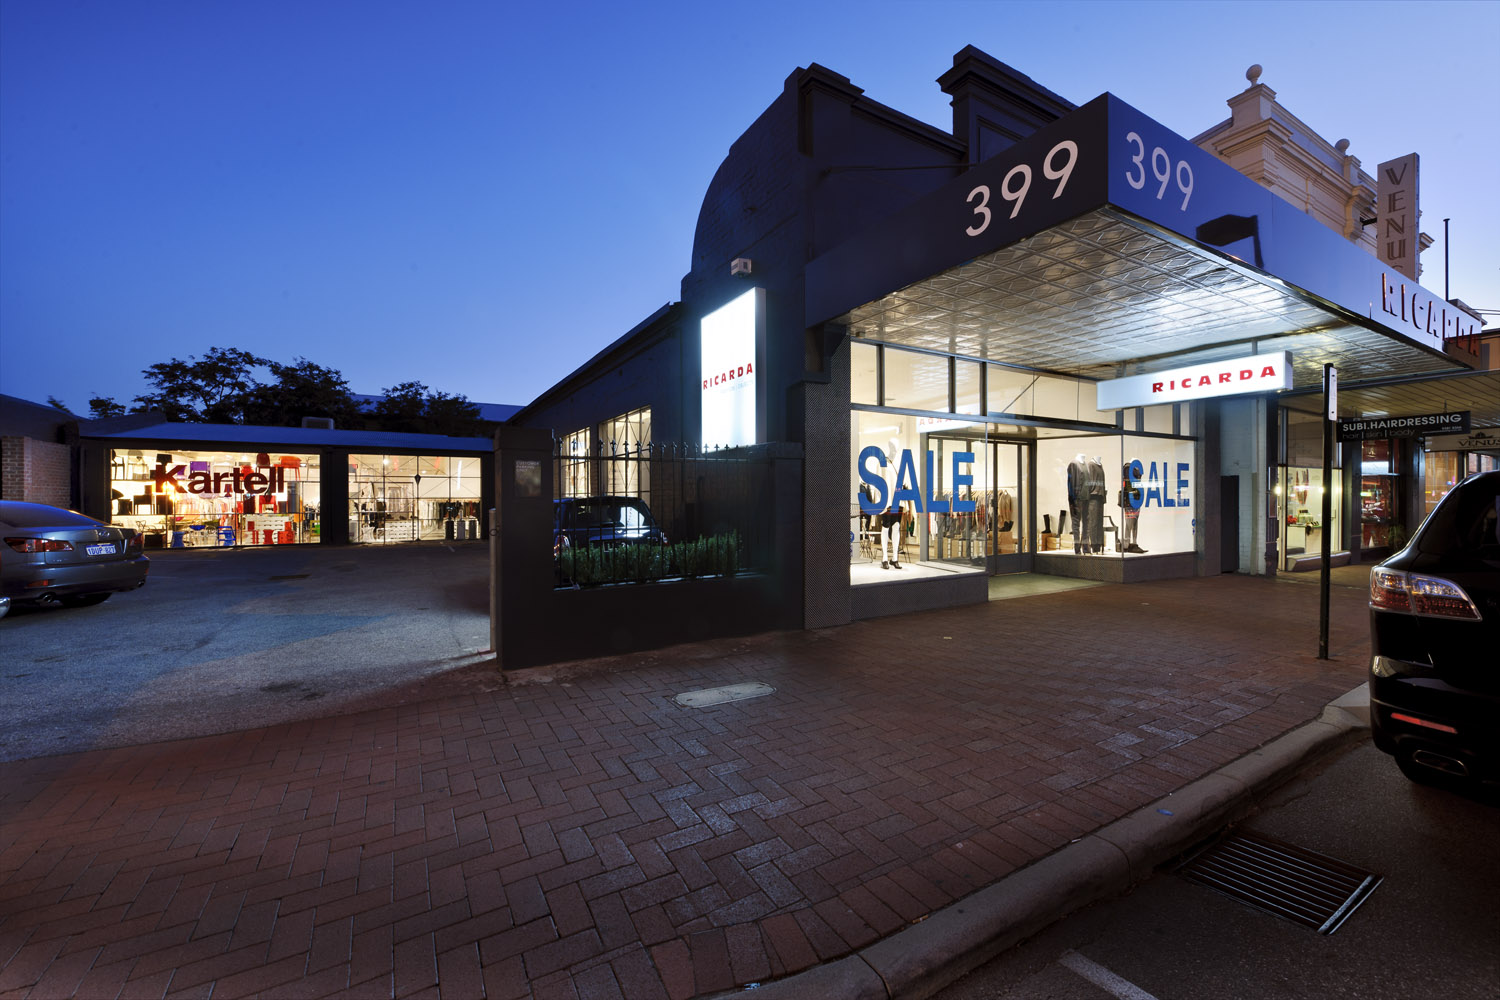 ricarda-subiaco-architectural-clothing-store-architecture-architect-design-designer-western-australia-commercial-exterior.jpg